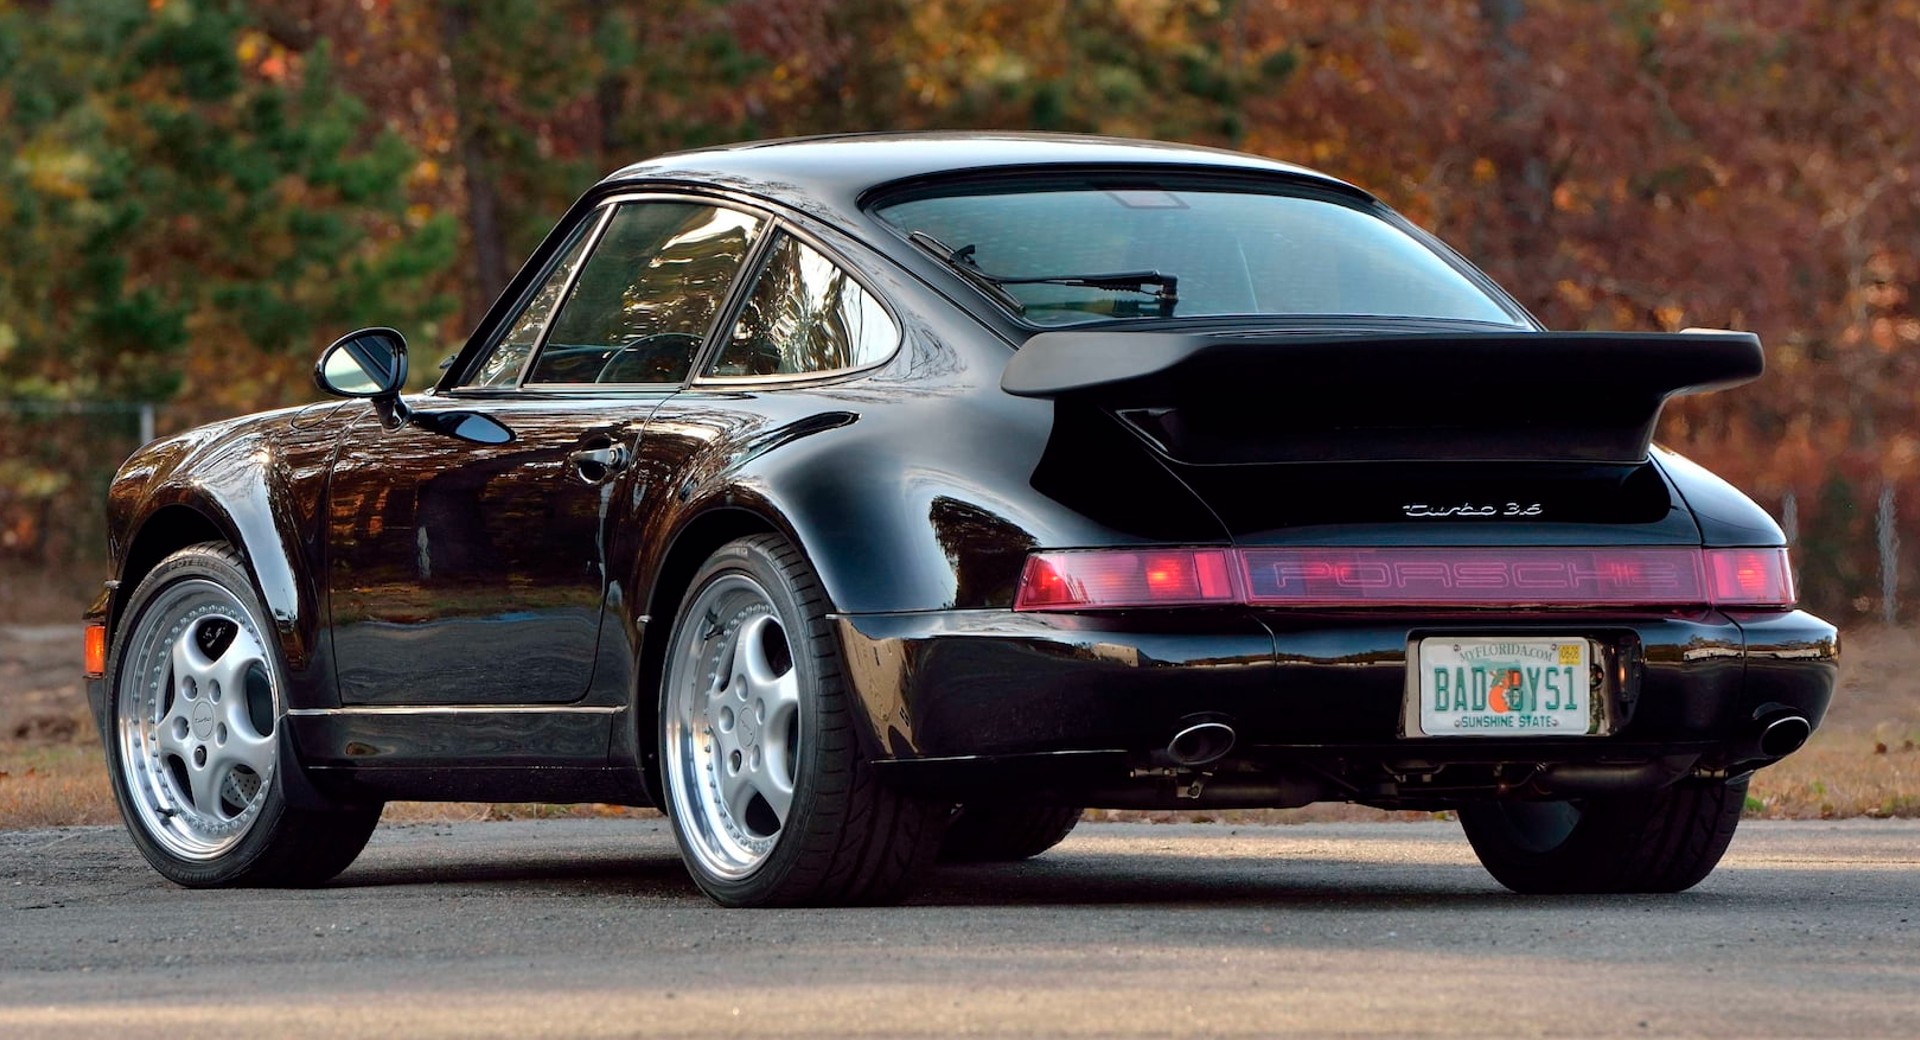 How Much Is The Original Bad Boys Movie 1994 Porsche 911 Turbo Worth To  You? | Carscoops